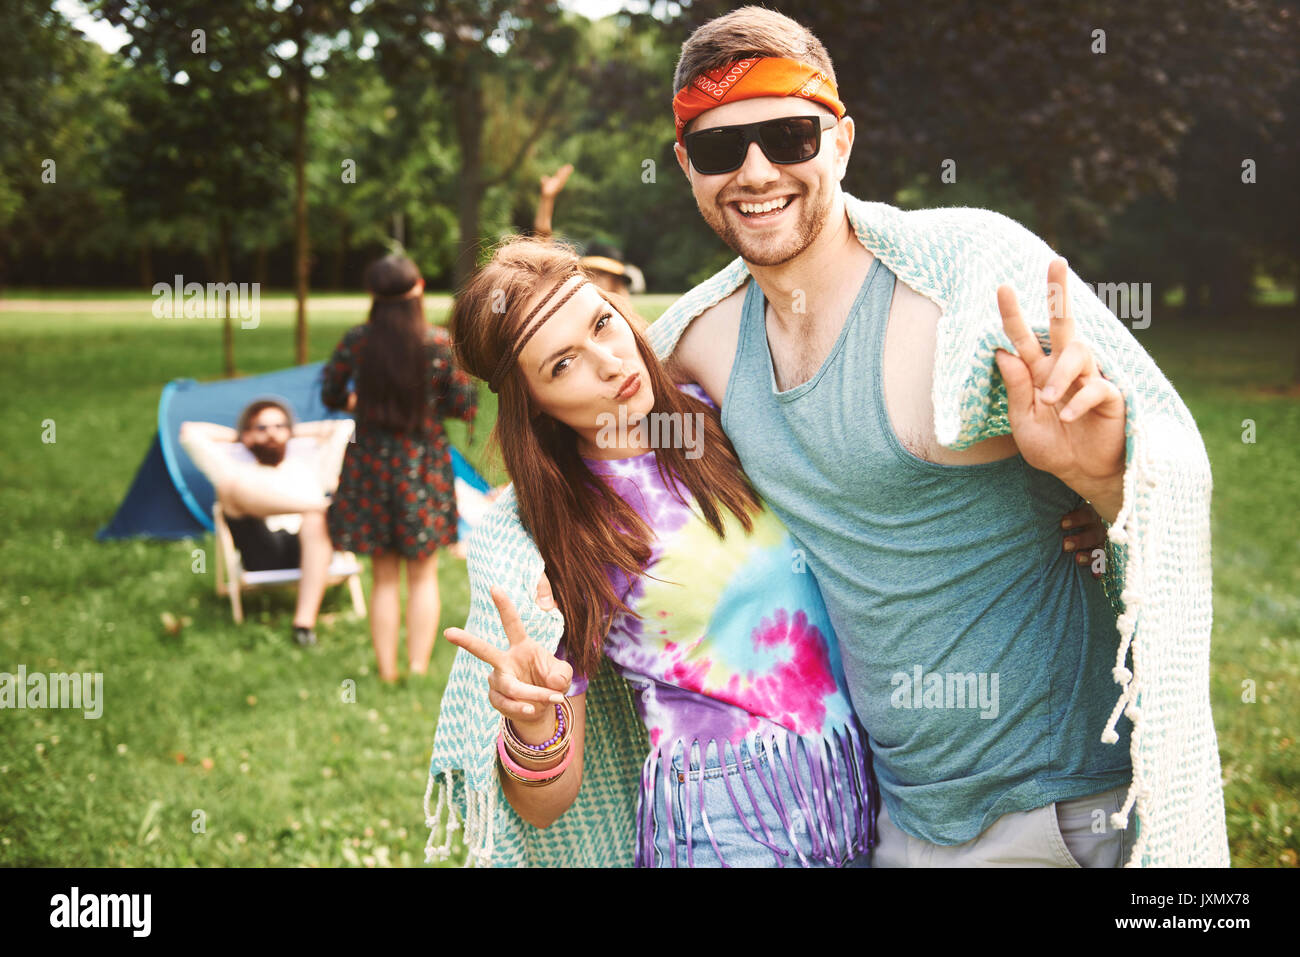 Portrait of young boho couple making peace signs at festival Stock Photo